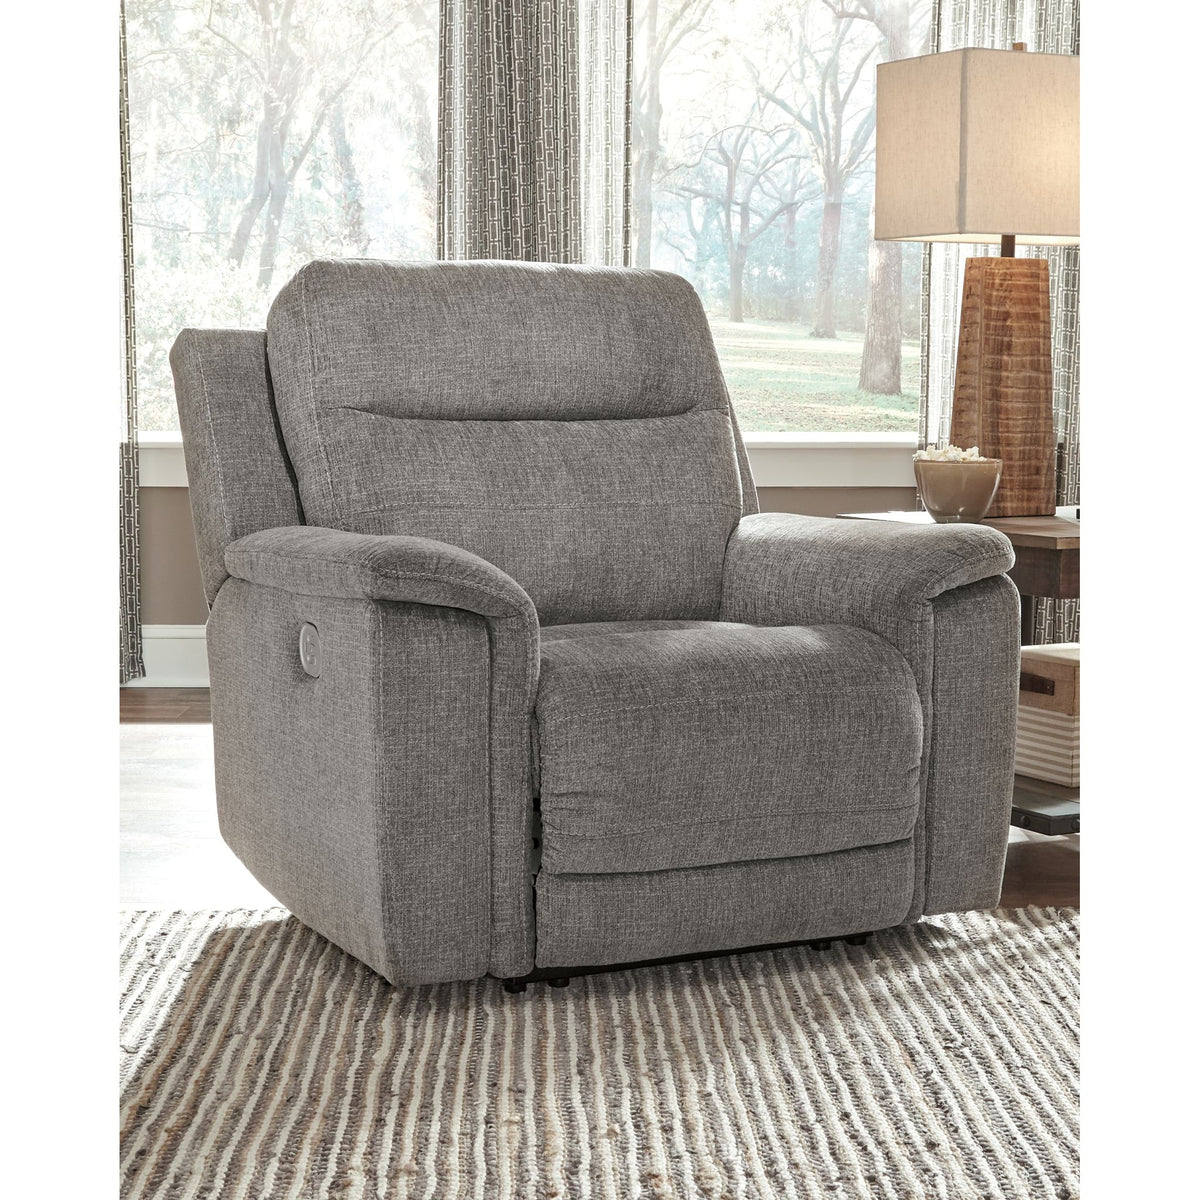 Simeon Collection Gemini Power Lift Recliner with Power Headrest in Capri  Silver